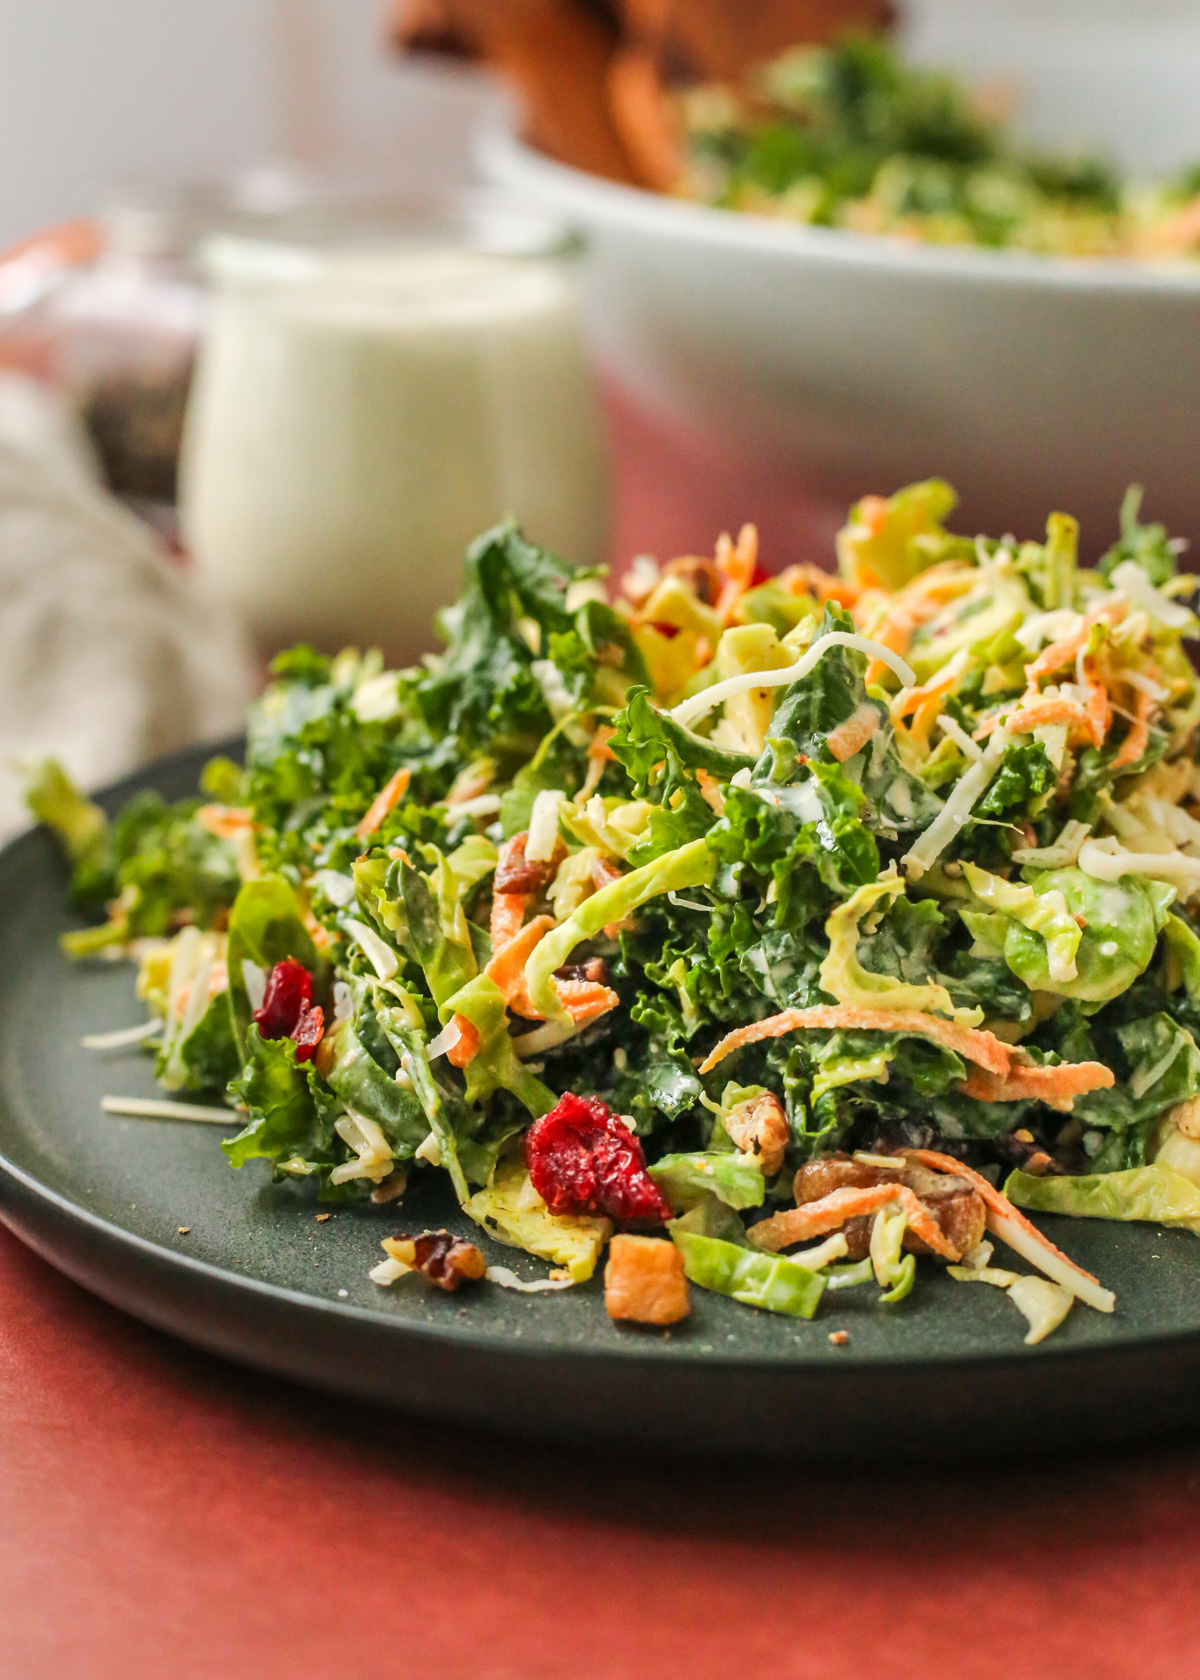 A close side view of a kale and brussels sprout salad, featuring shredded carrots, dried cranberries, and chopped nuts mixed throughout with everything tossed in a creamy white dressing